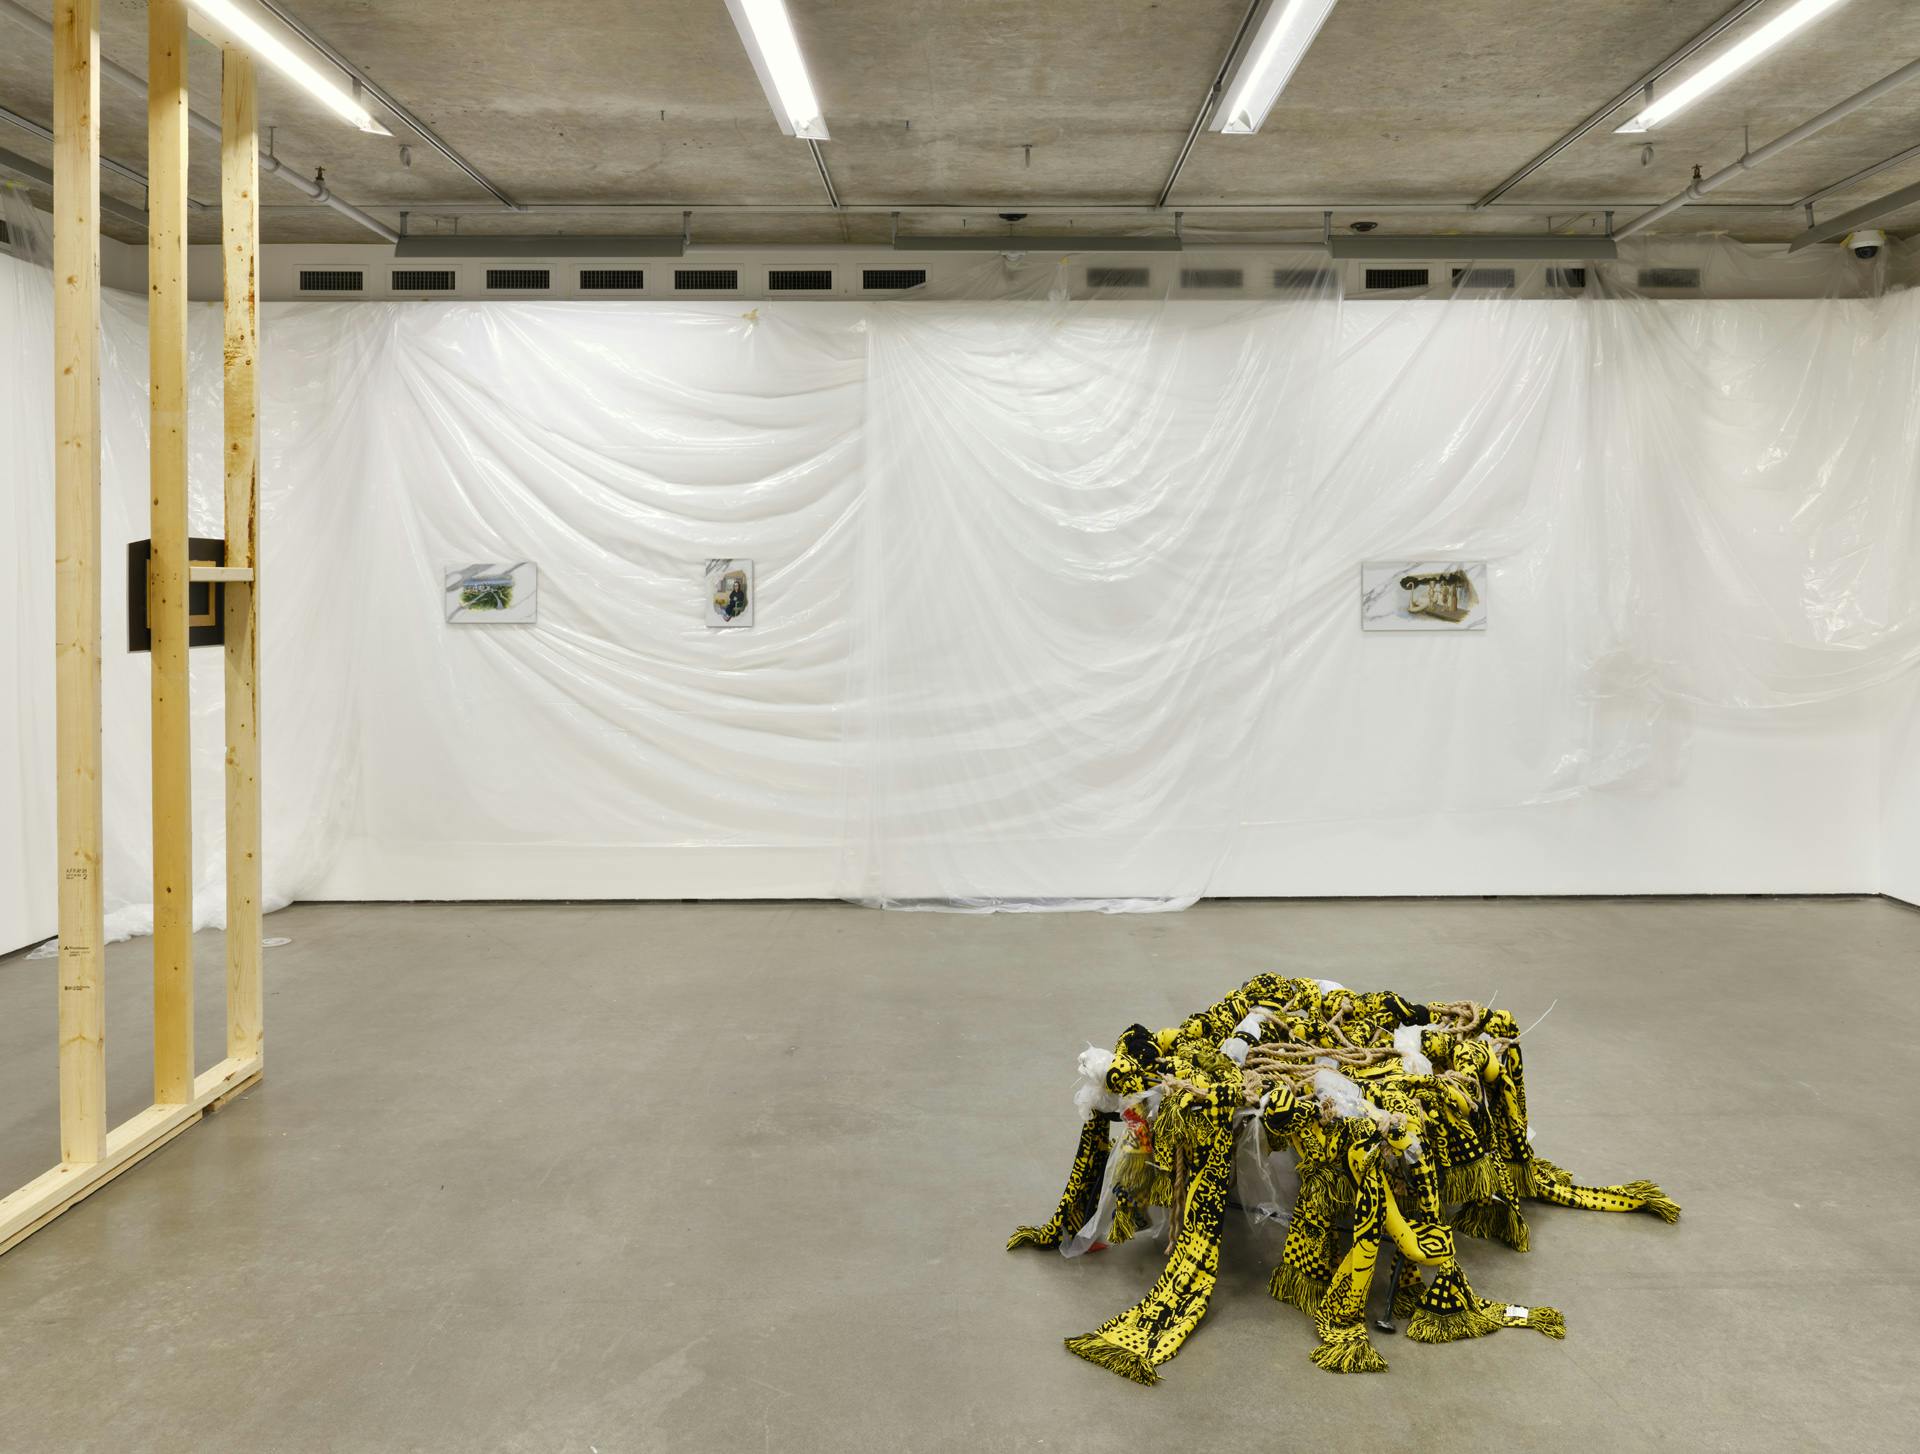 Three small paintings hang on a gallery wall draped with plastic sheetings. To the left is an unfinished wooden wall structure. A sculpture made of yellow textiles, plastic and rope sits on the floor. 